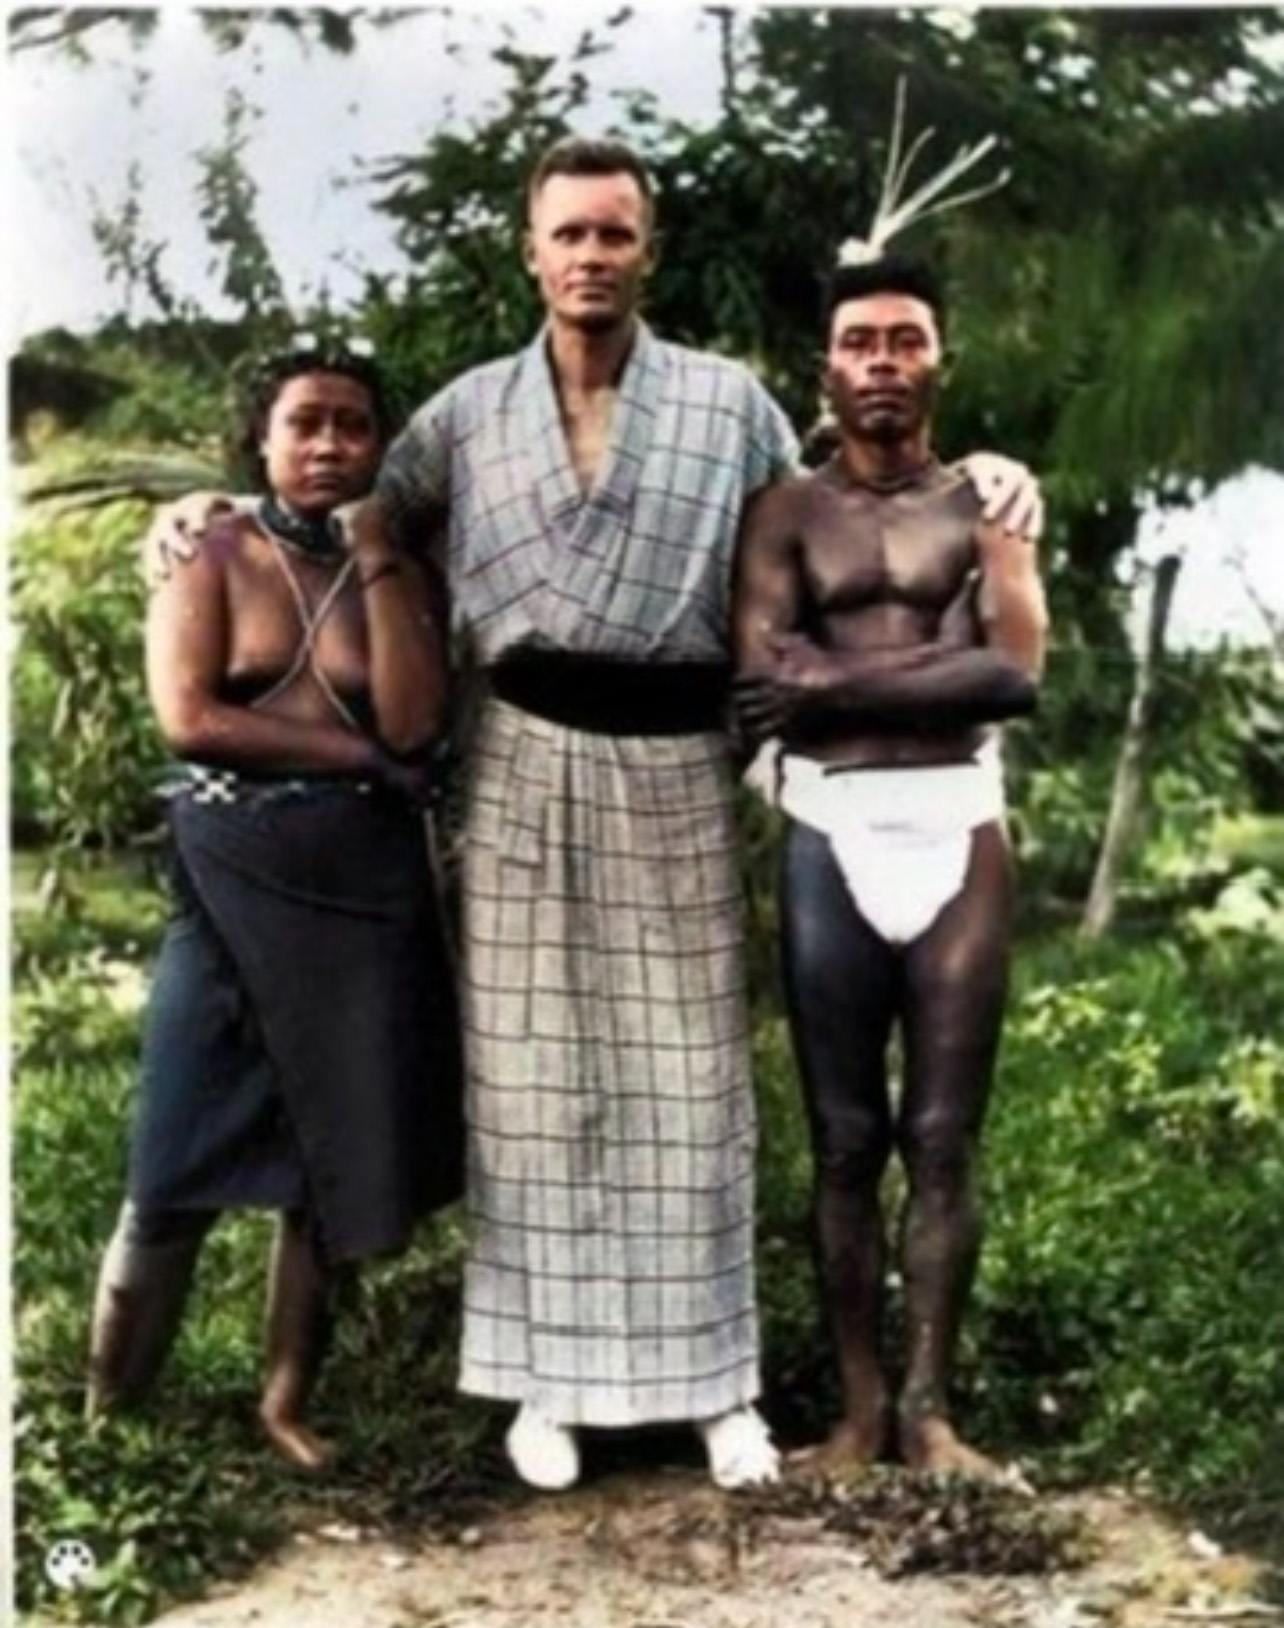 Hans Hornbostel poses with two local residents